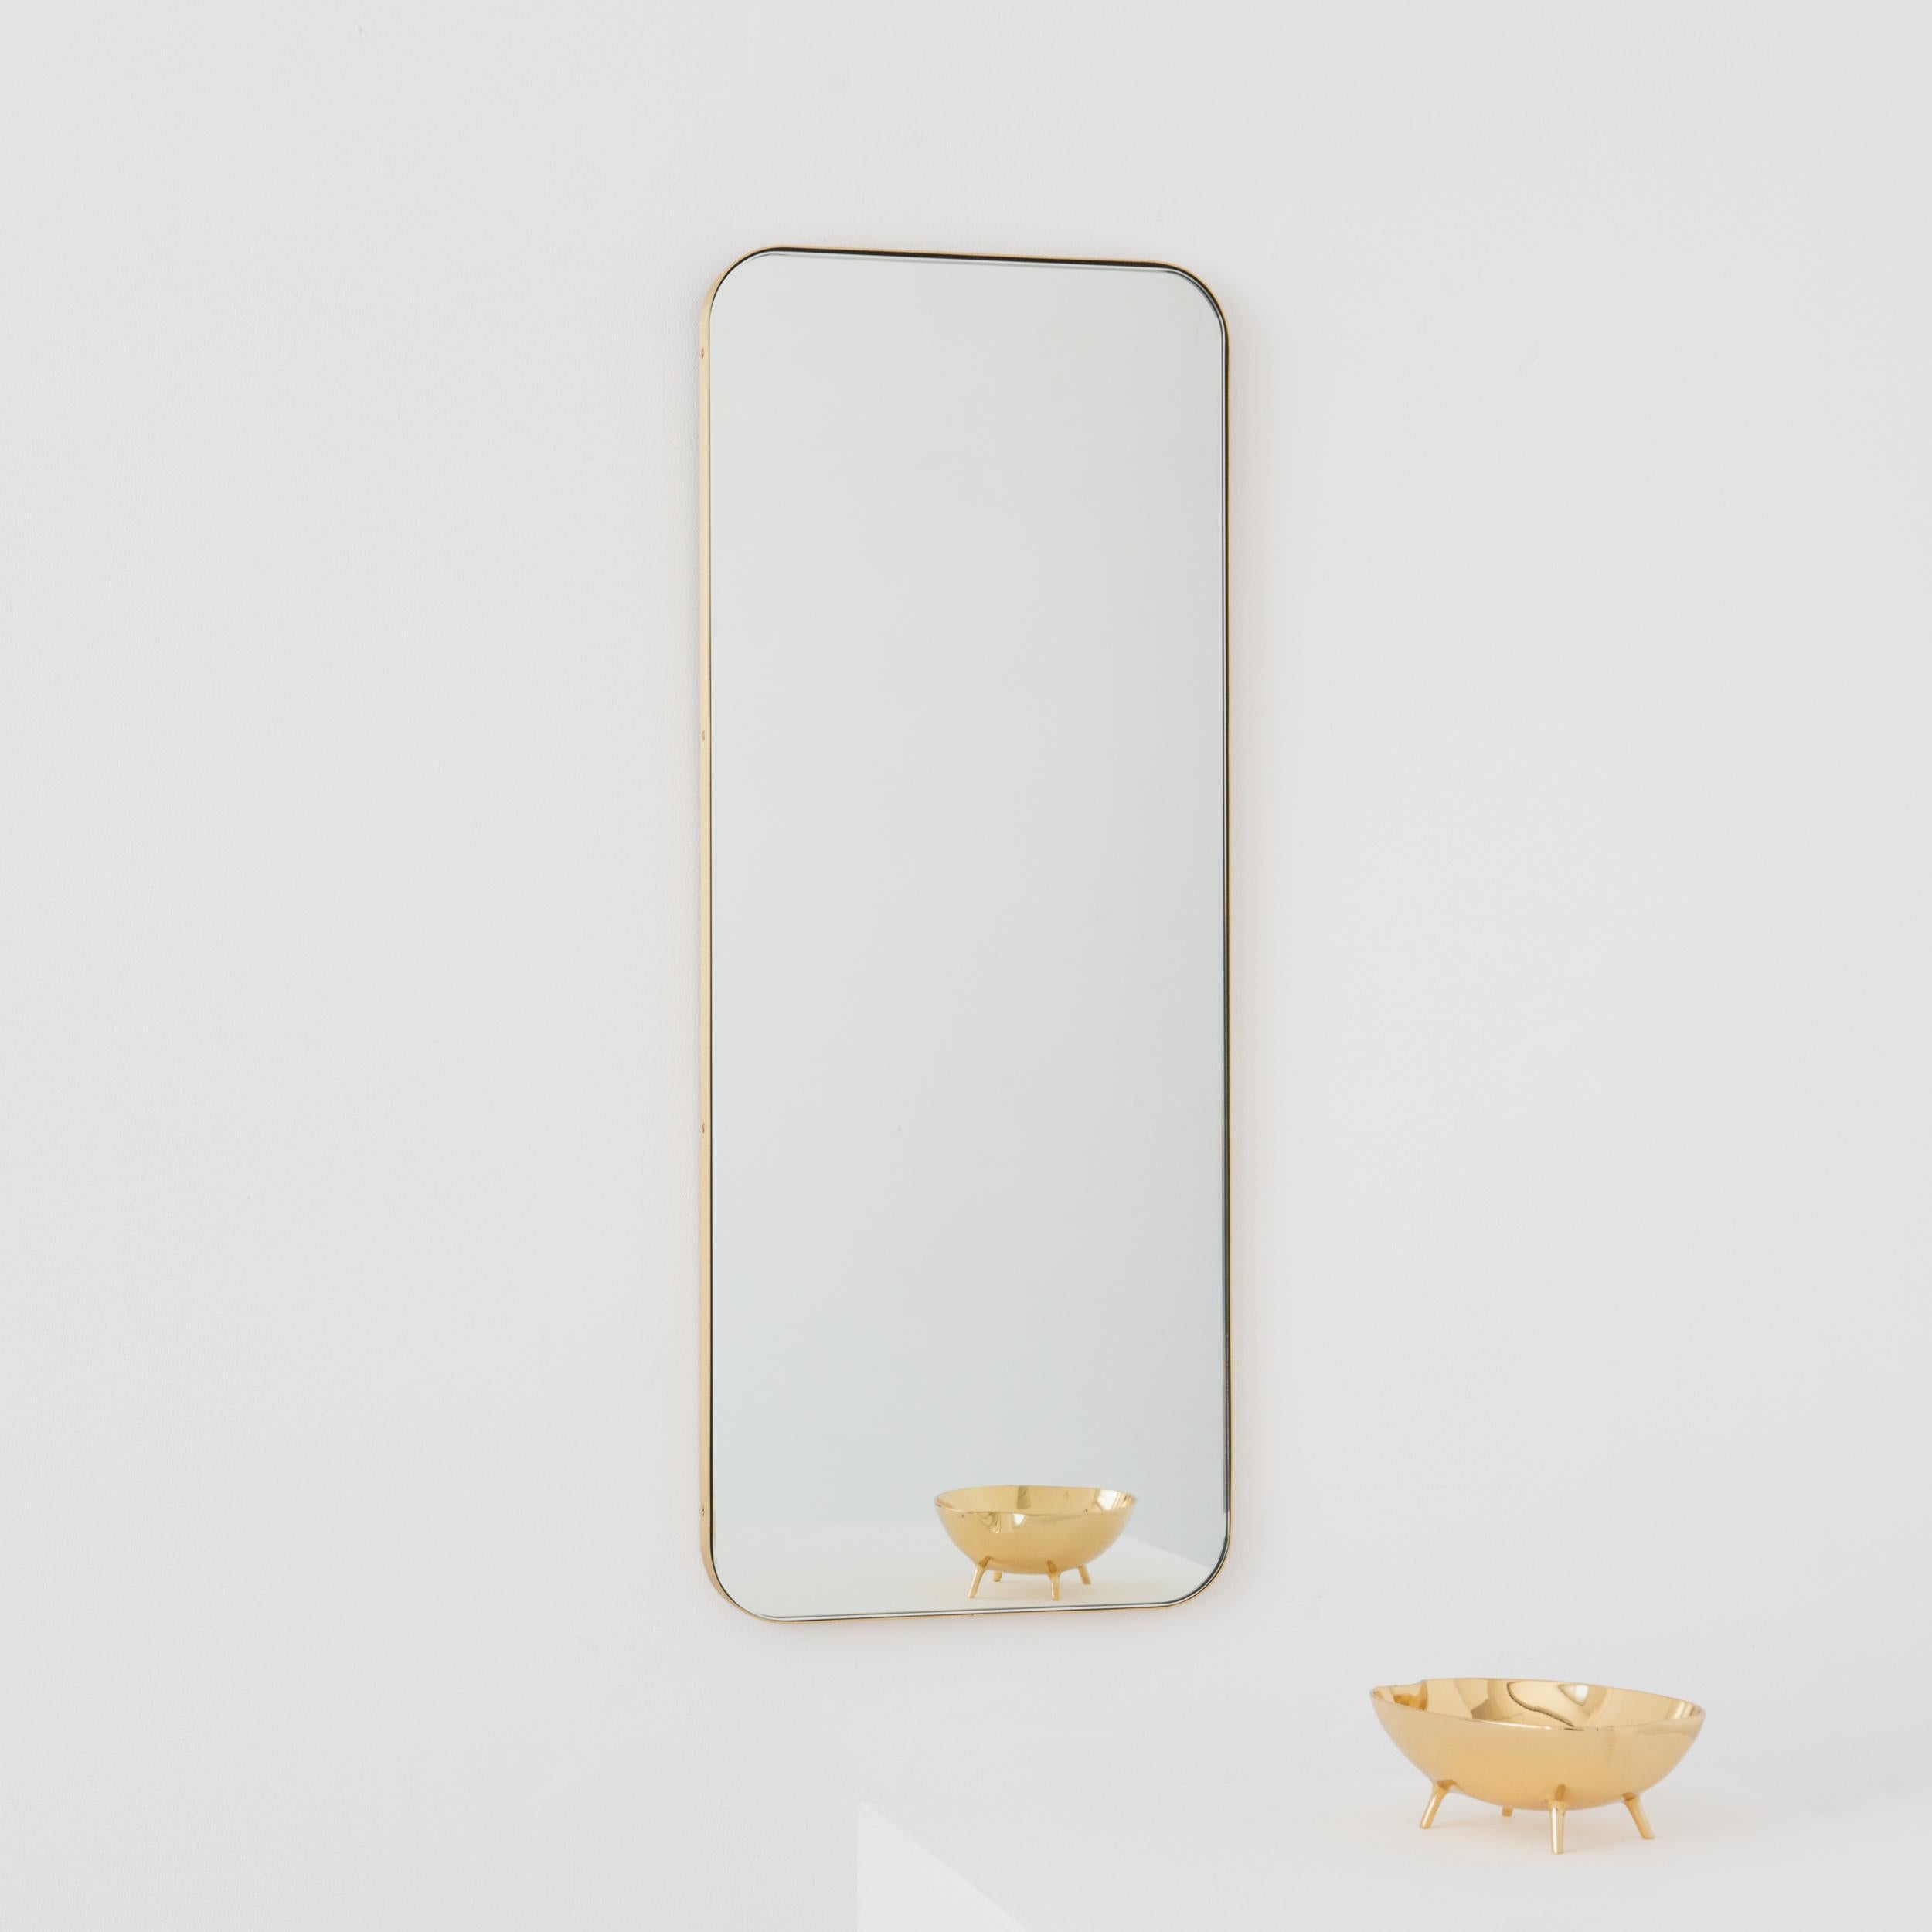 Modern rectangular mirror with an elegant solid brushed brass frame. Part of the charming Quadris™ collection, designed and handcrafted in London, UK. 

Our mirrors are designed with an integrated French cleat (split batten) system that ensures the